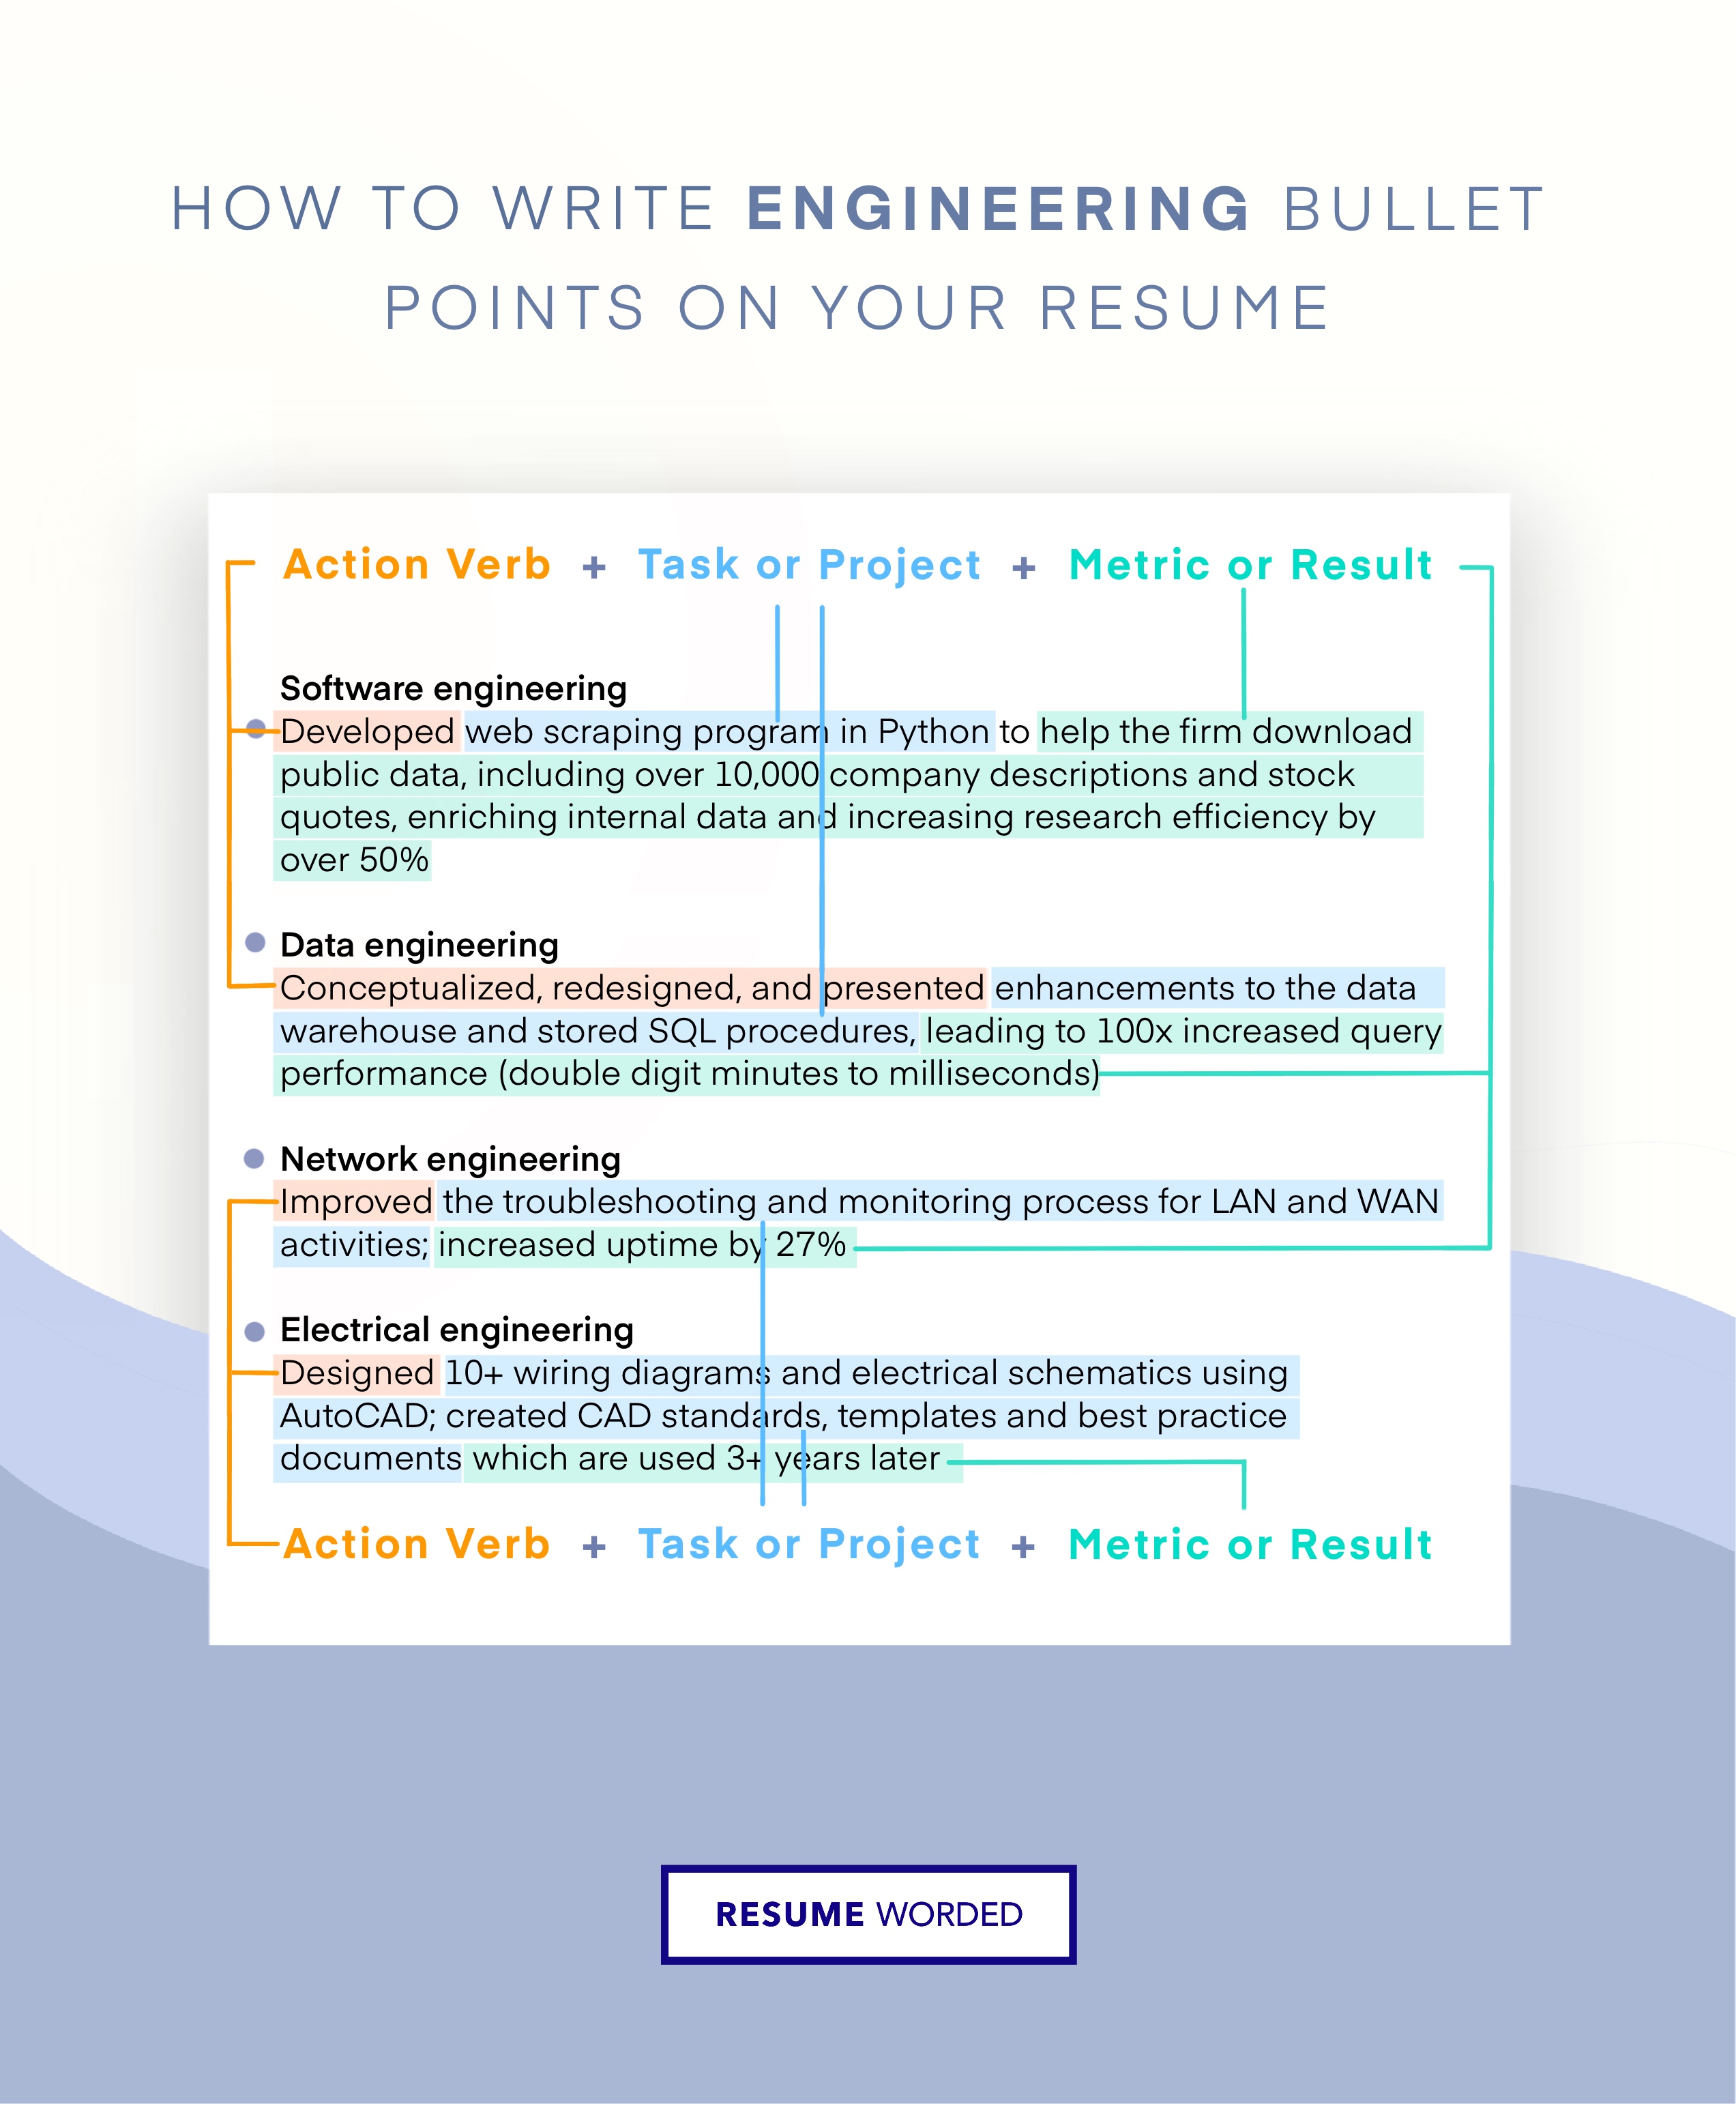 Highlight your experience in business process reengineering - Salesforce Business Analyst  CV